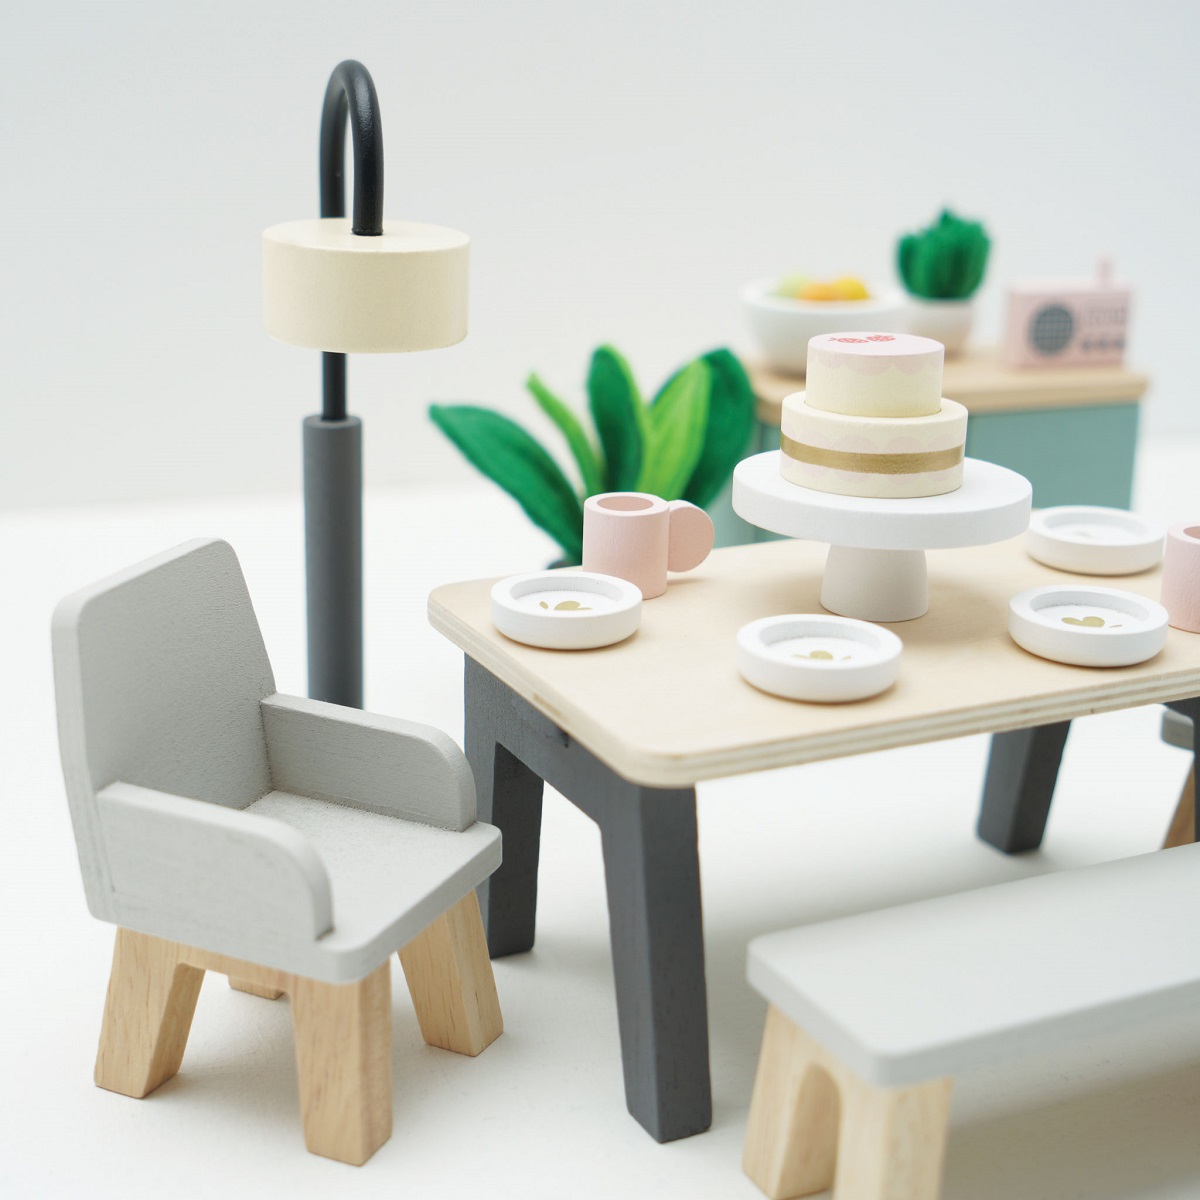 Doll House Furniture - Dining Room